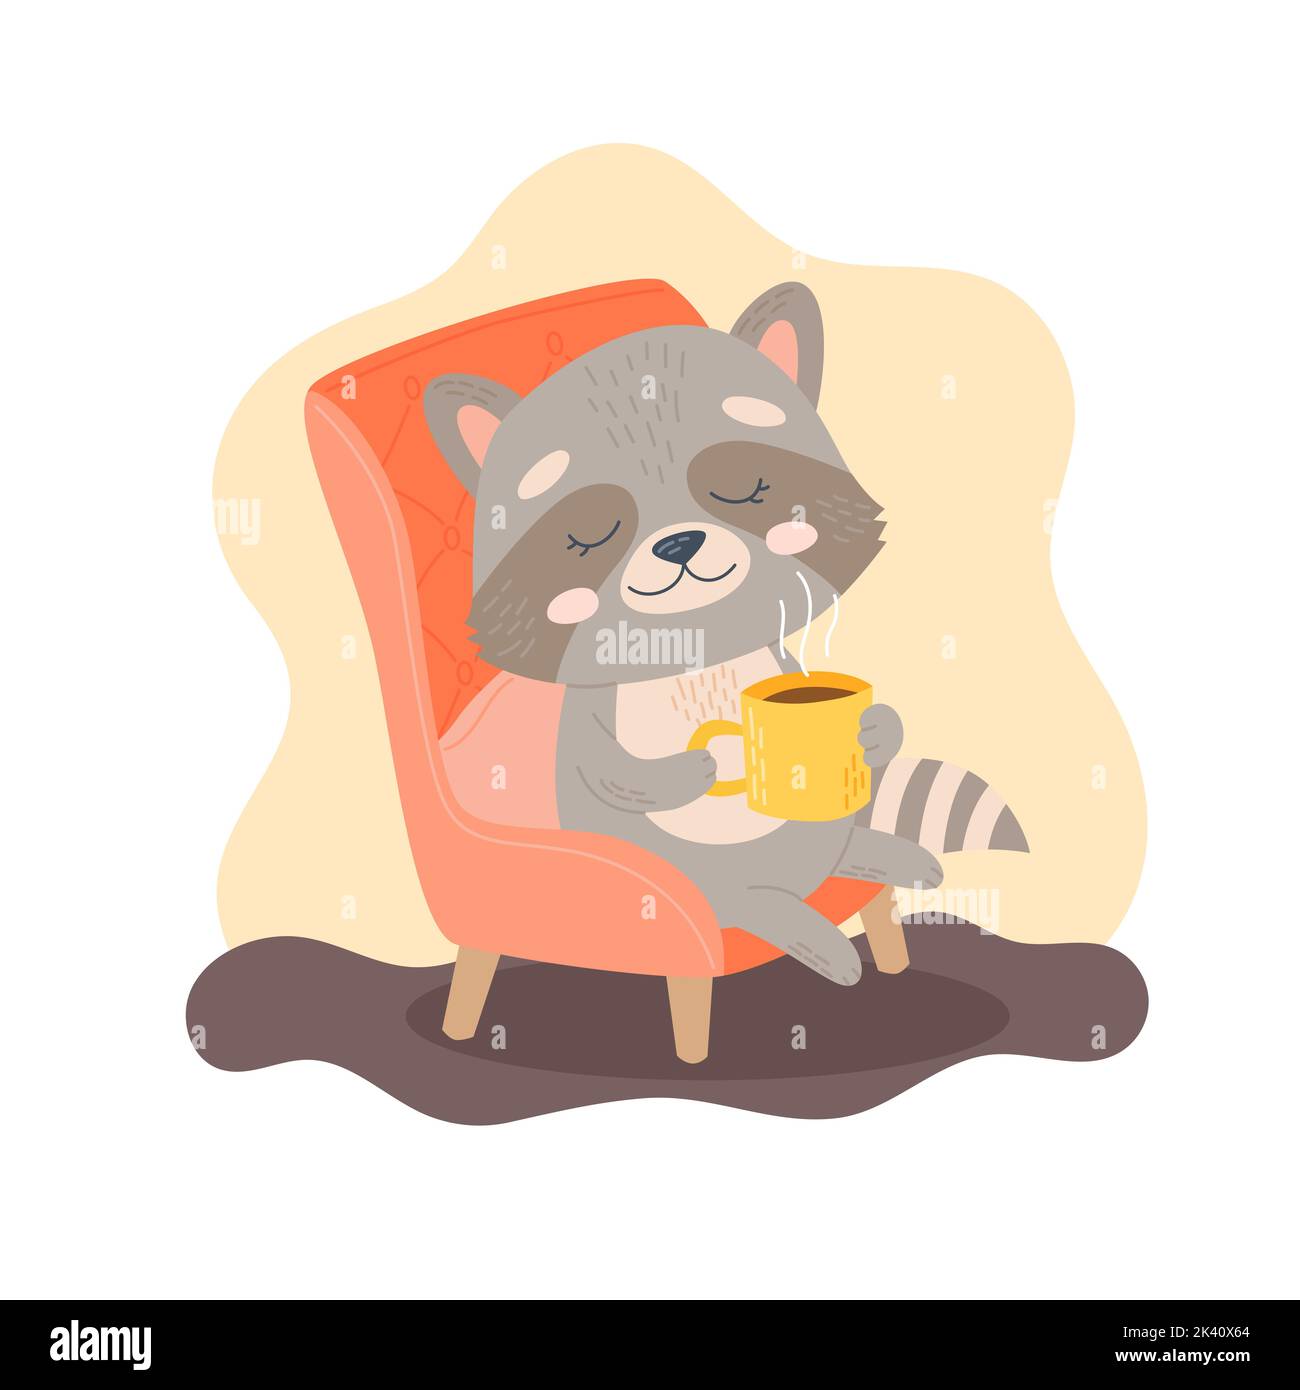 Head Of Racoon In Hipster Sunglasses Kawaii Animal Stock Illustration -  Download Image Now - iStock